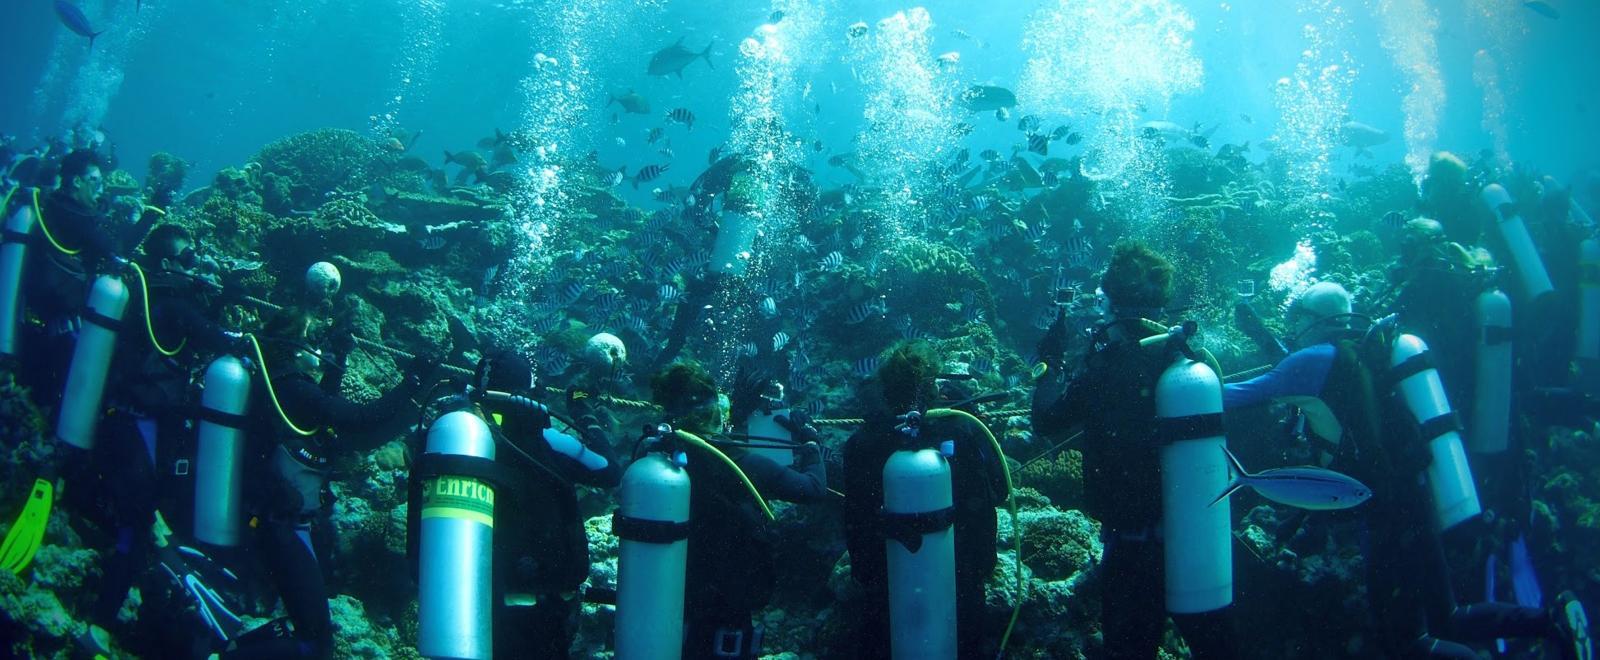 Volunteers scuba dive during our Shark Conservation Project in Fiji for high school students